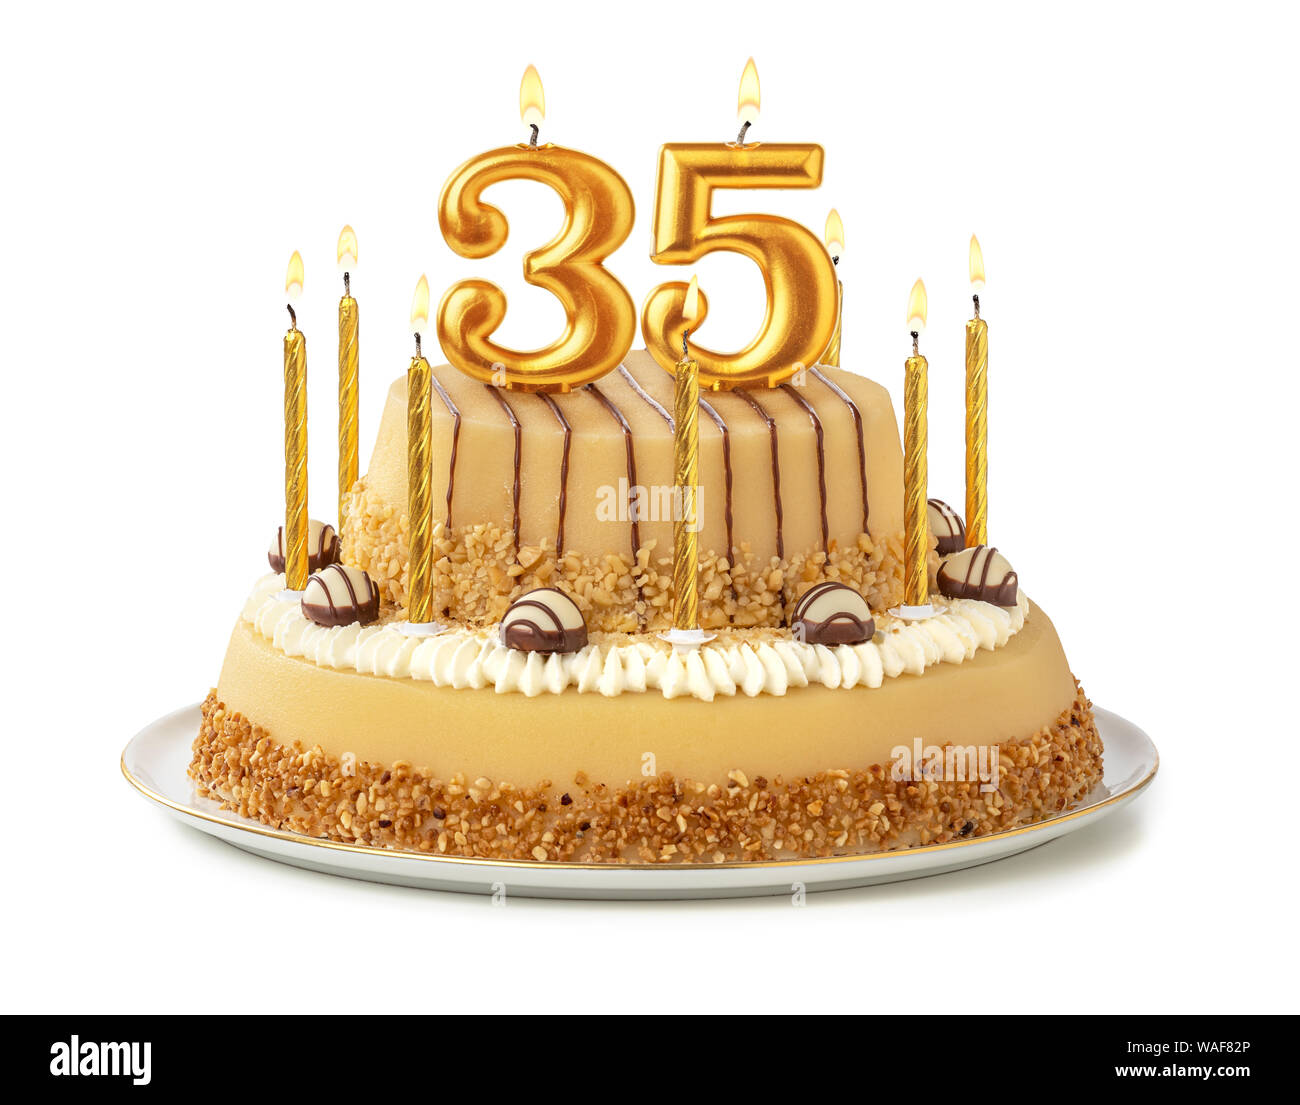 Festive cake with golden candles - Number 35 Stock Photo